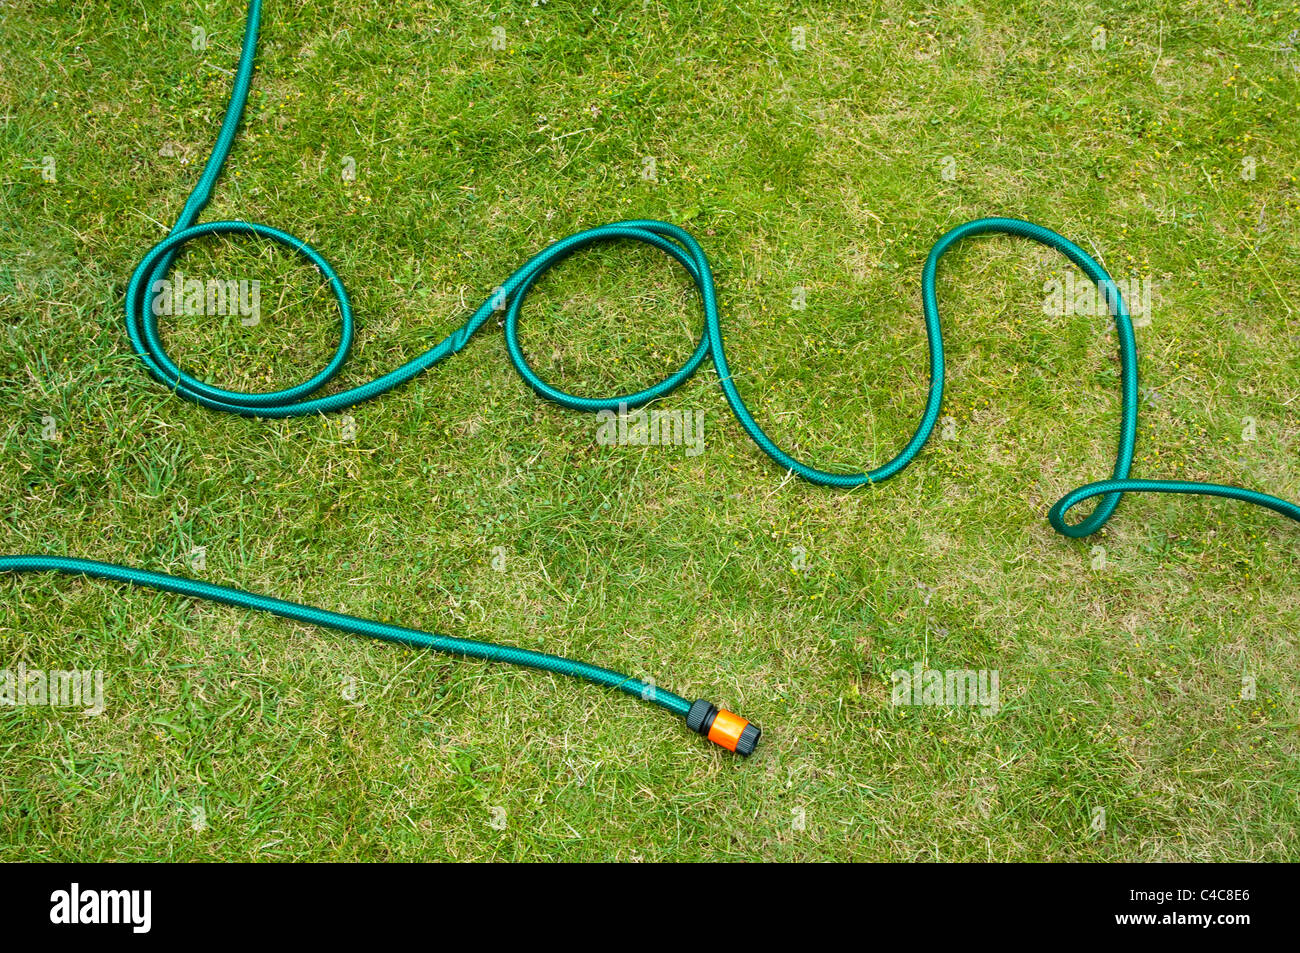 A water shortage usually leads to a hose pipe ban. The pipe is disconnected and laid out on a lawn, it reads as the word ban. UK Stock Photo